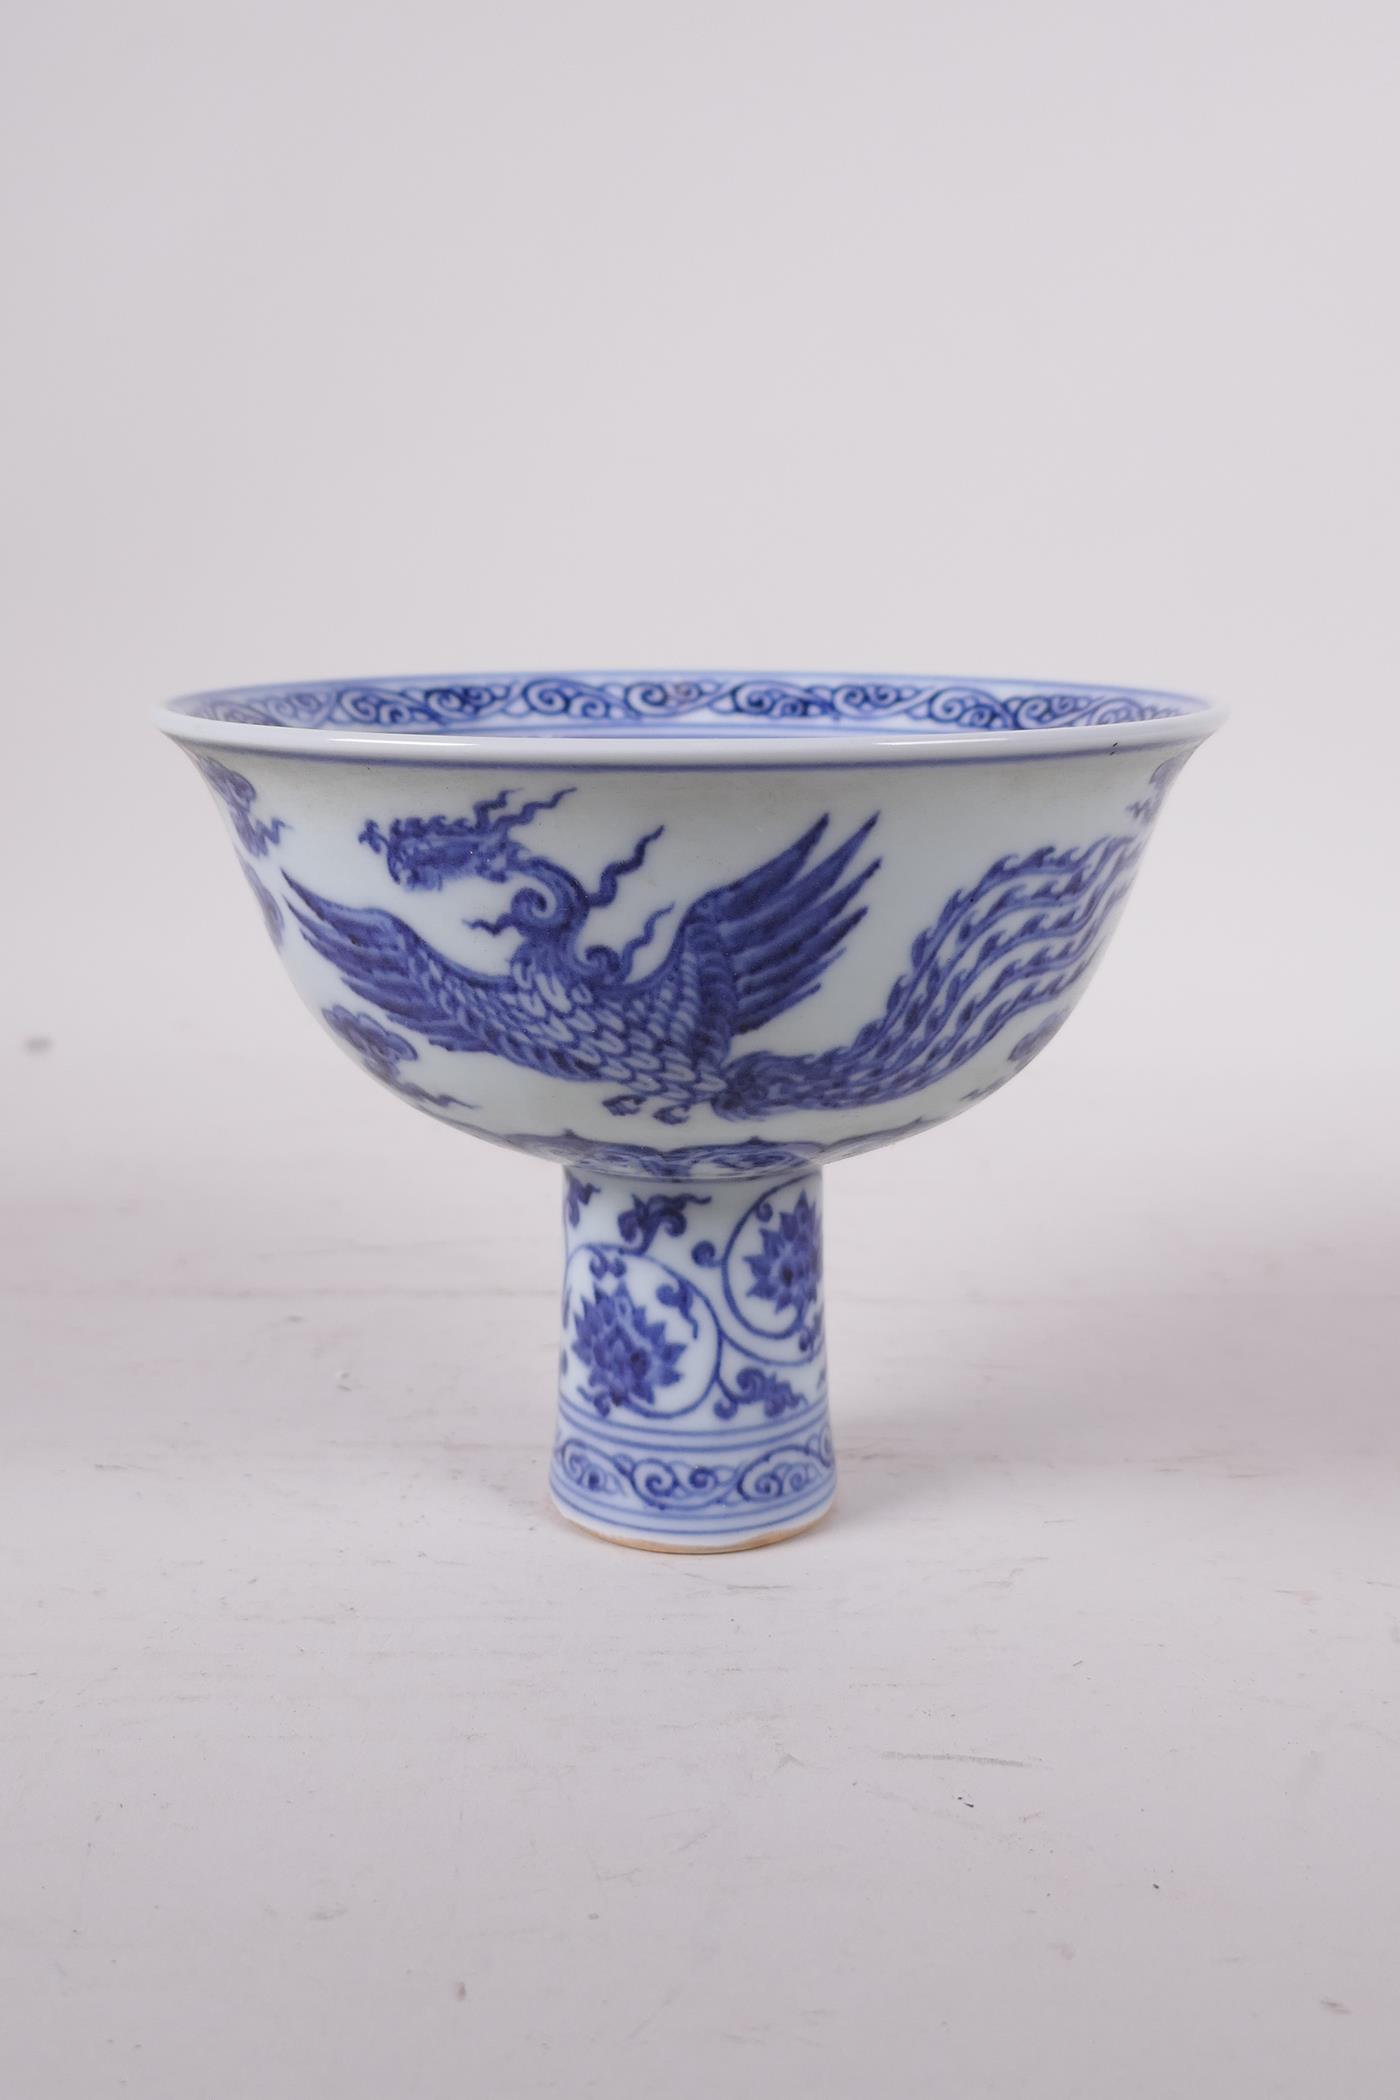 A Ming style blue and white porcelain stem bowl with phoenix decoration, Chinese, 4" high x 5" - Image 3 of 5